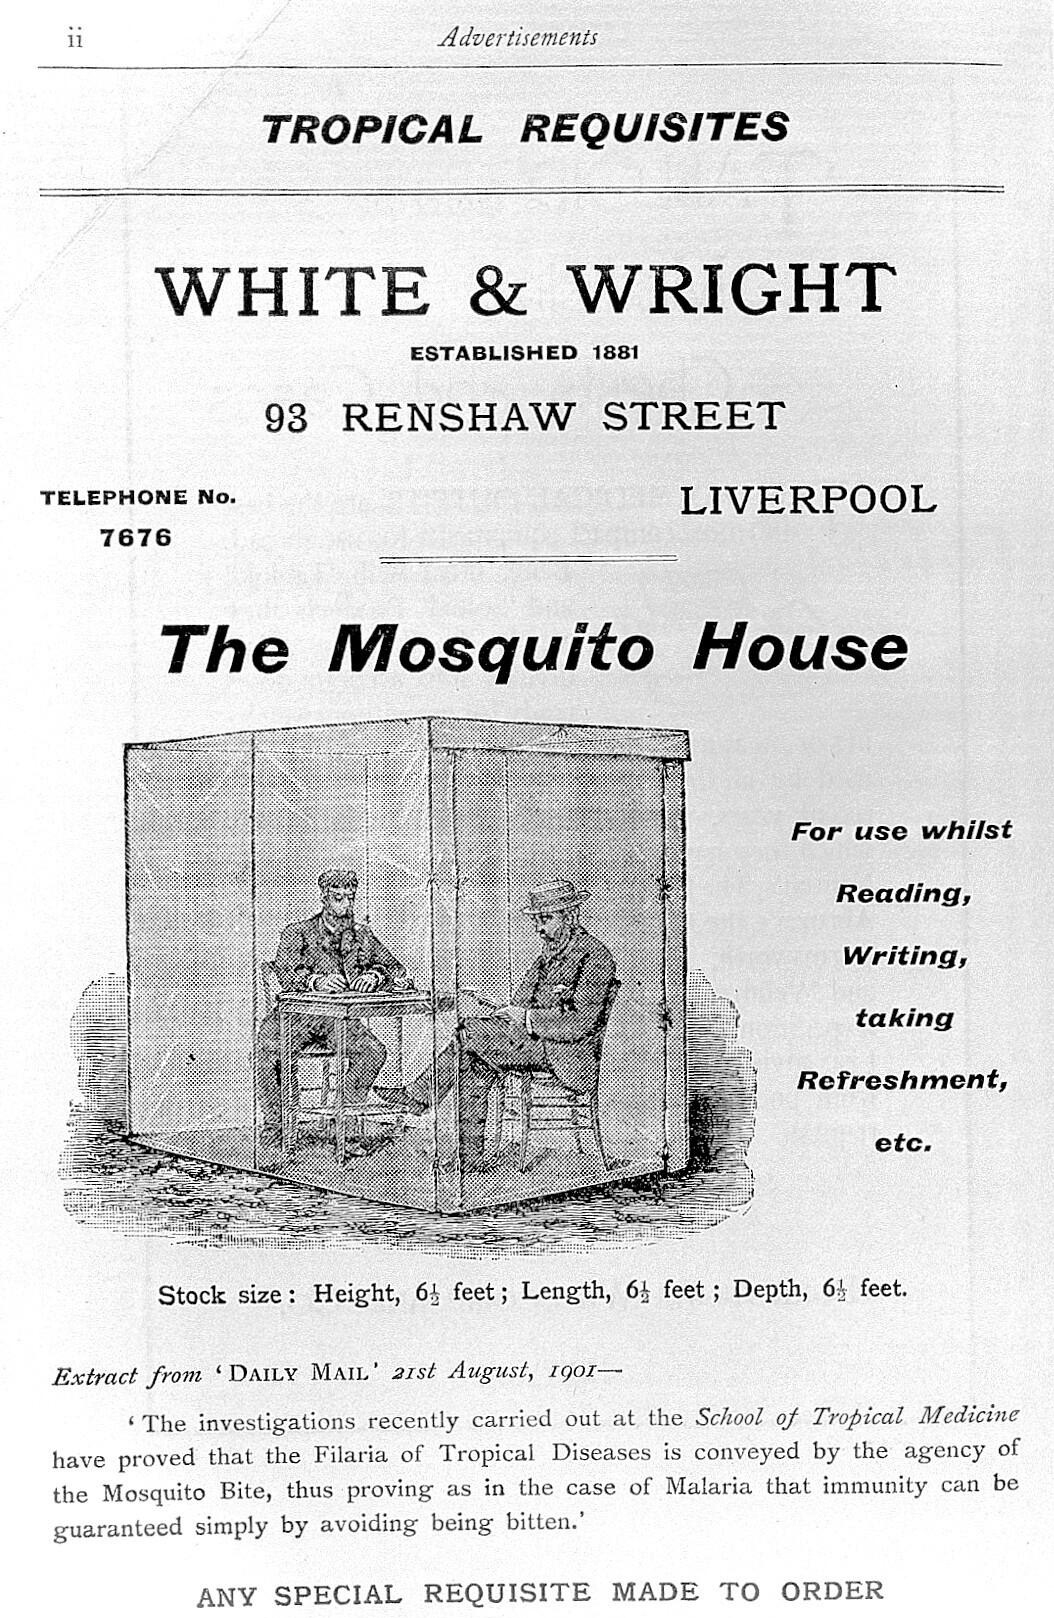 An adervistement for a Mosquito House sold by White and Wright of Liverpool is listed under "tropical requisites". The image shows two smartly dressed European men, on sat writing at a small table, another cross-legged on a chair reading a book. They and the furniture are encased in a large rectangular box made of a transluscent material of fine guaze designed to exclude mosquitos. An accompanying quote from teh Daily Mail for 1901 says "in the case of Malaria immunity can be guaranteed simply by avoiding beng bitten".